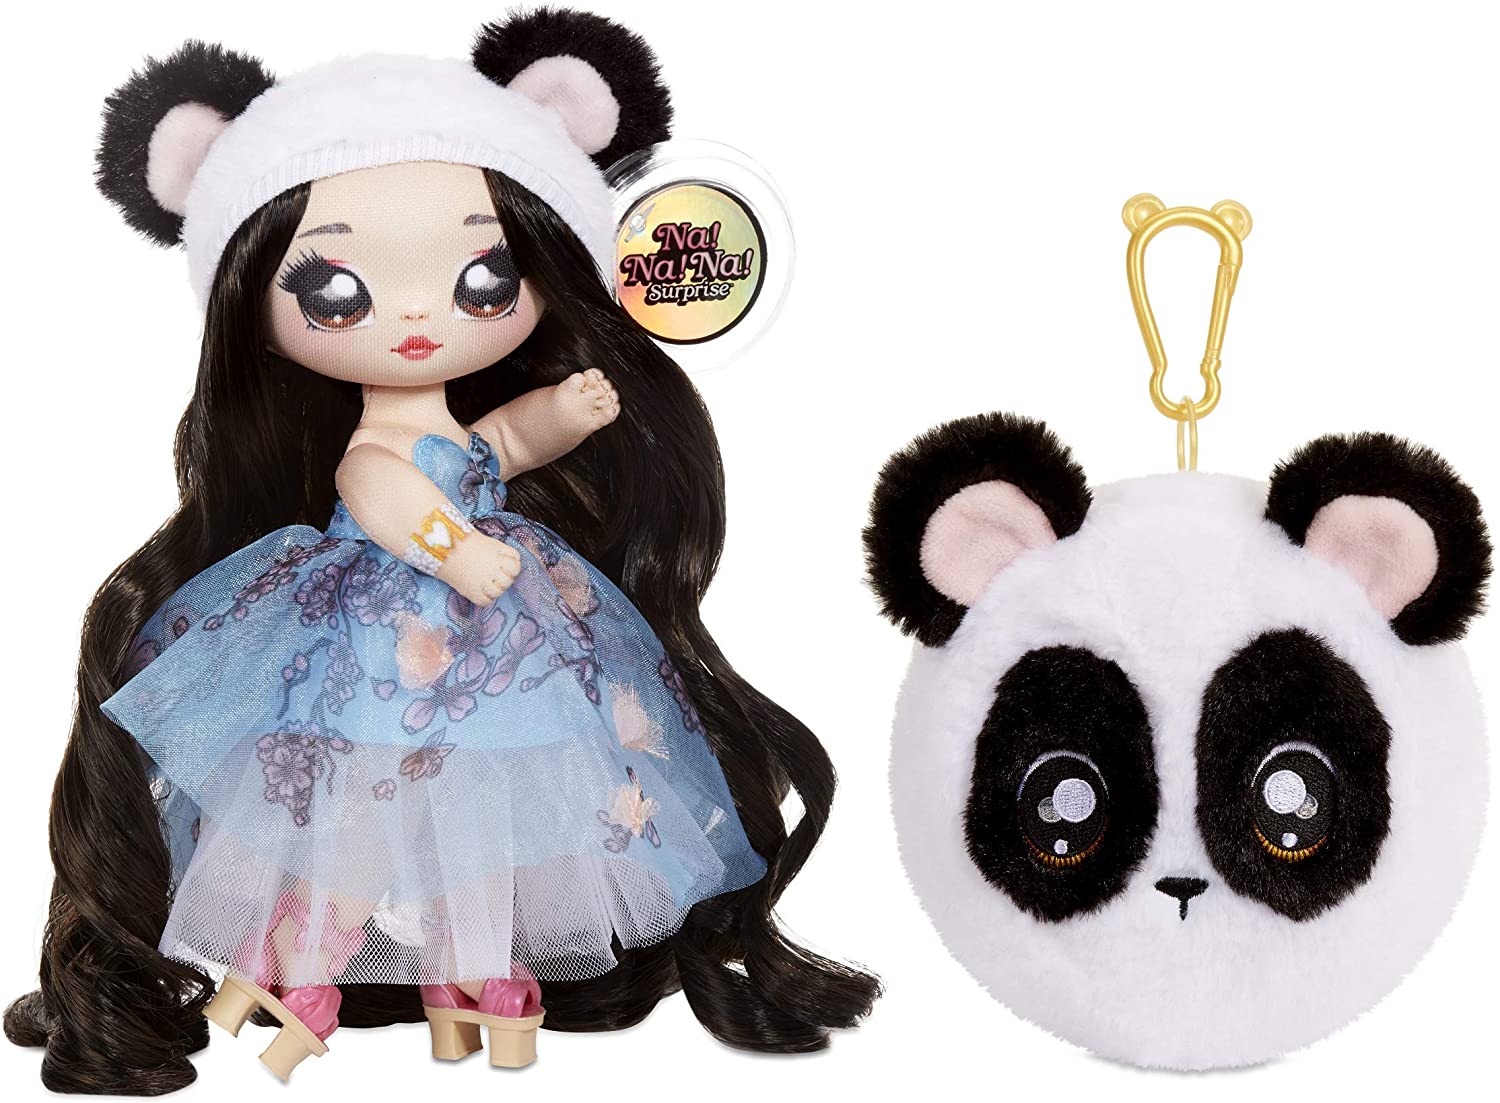 Na! Na! Surprise 2-In-1 Fashion Doll And Plush Bag - Collectibles - Series 